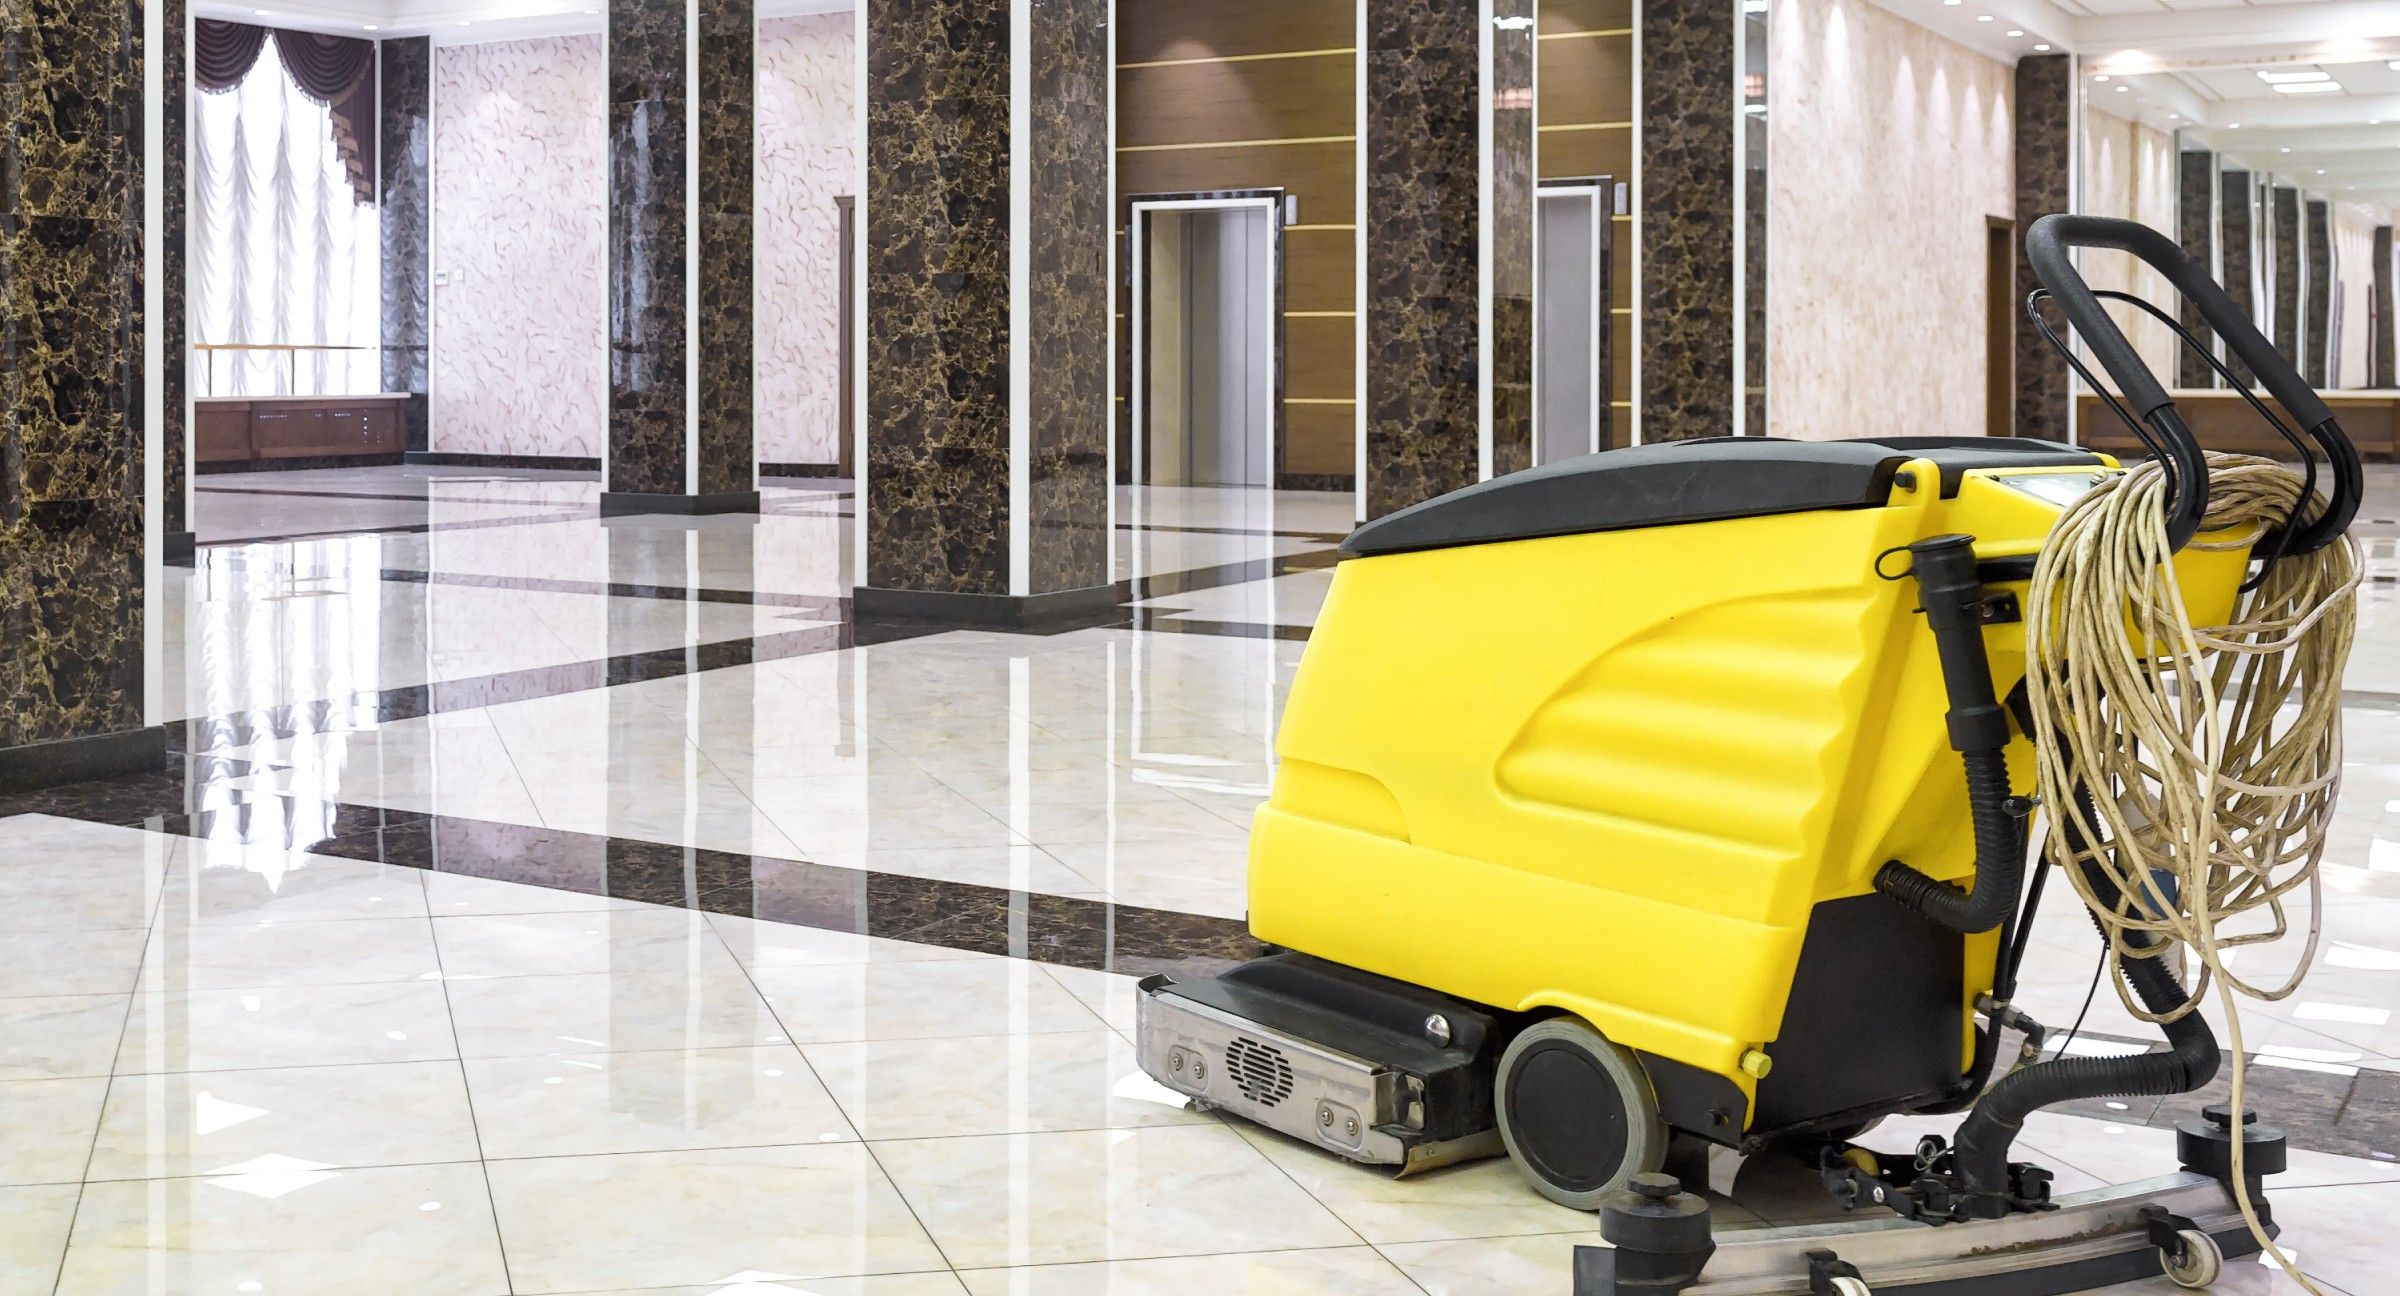 5 Tips to Hire the Best Commercial Cleaner for your Hotel: What To Look For As You Interview Candidates